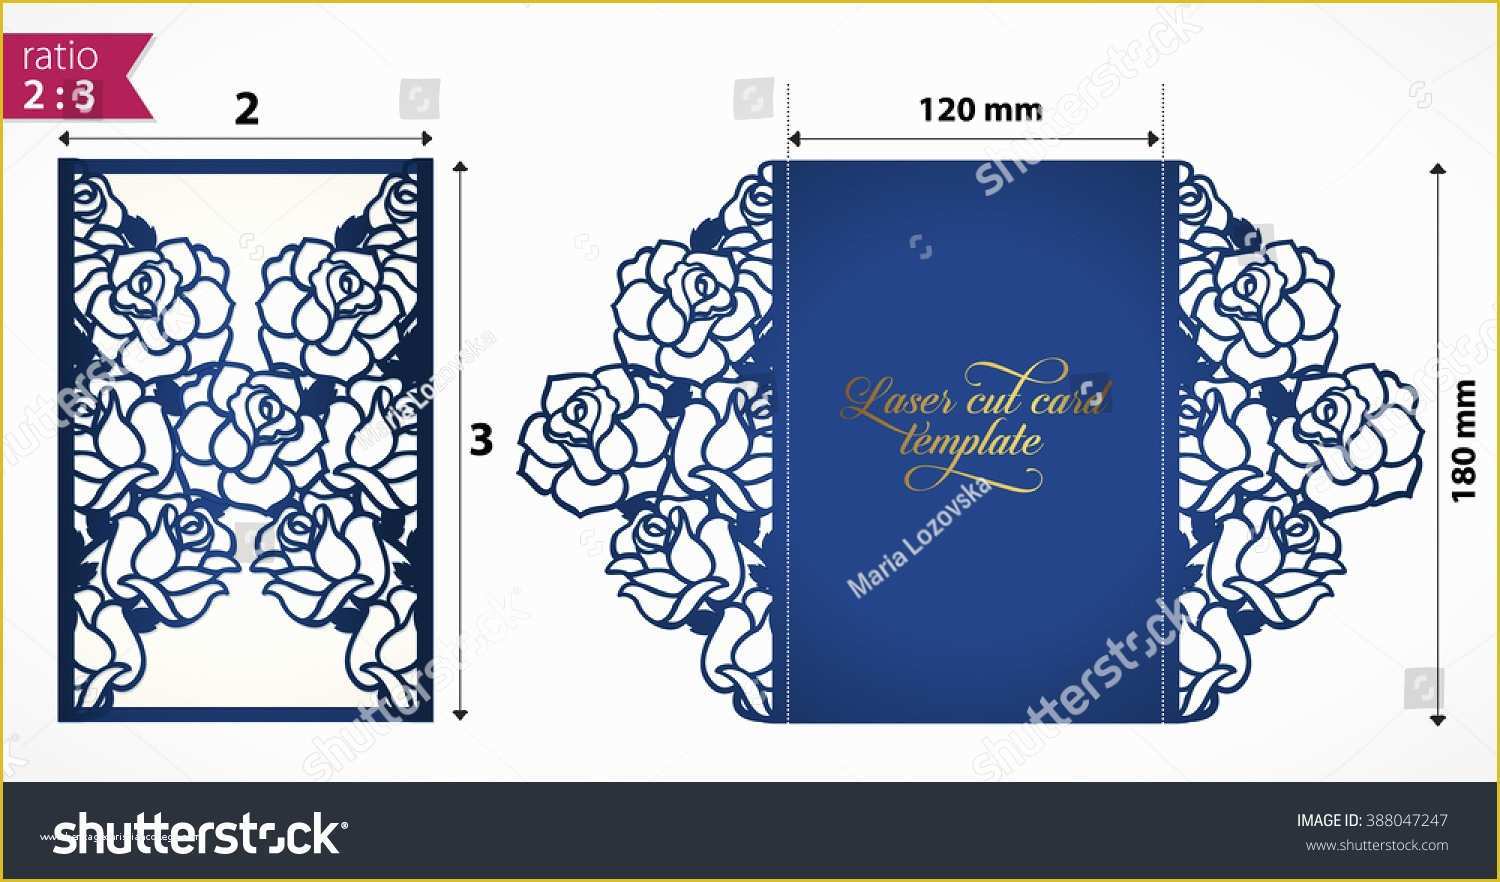 Laser Cut Templates Free Of Laser Cut Wedding Invitation Template with Roses Vector